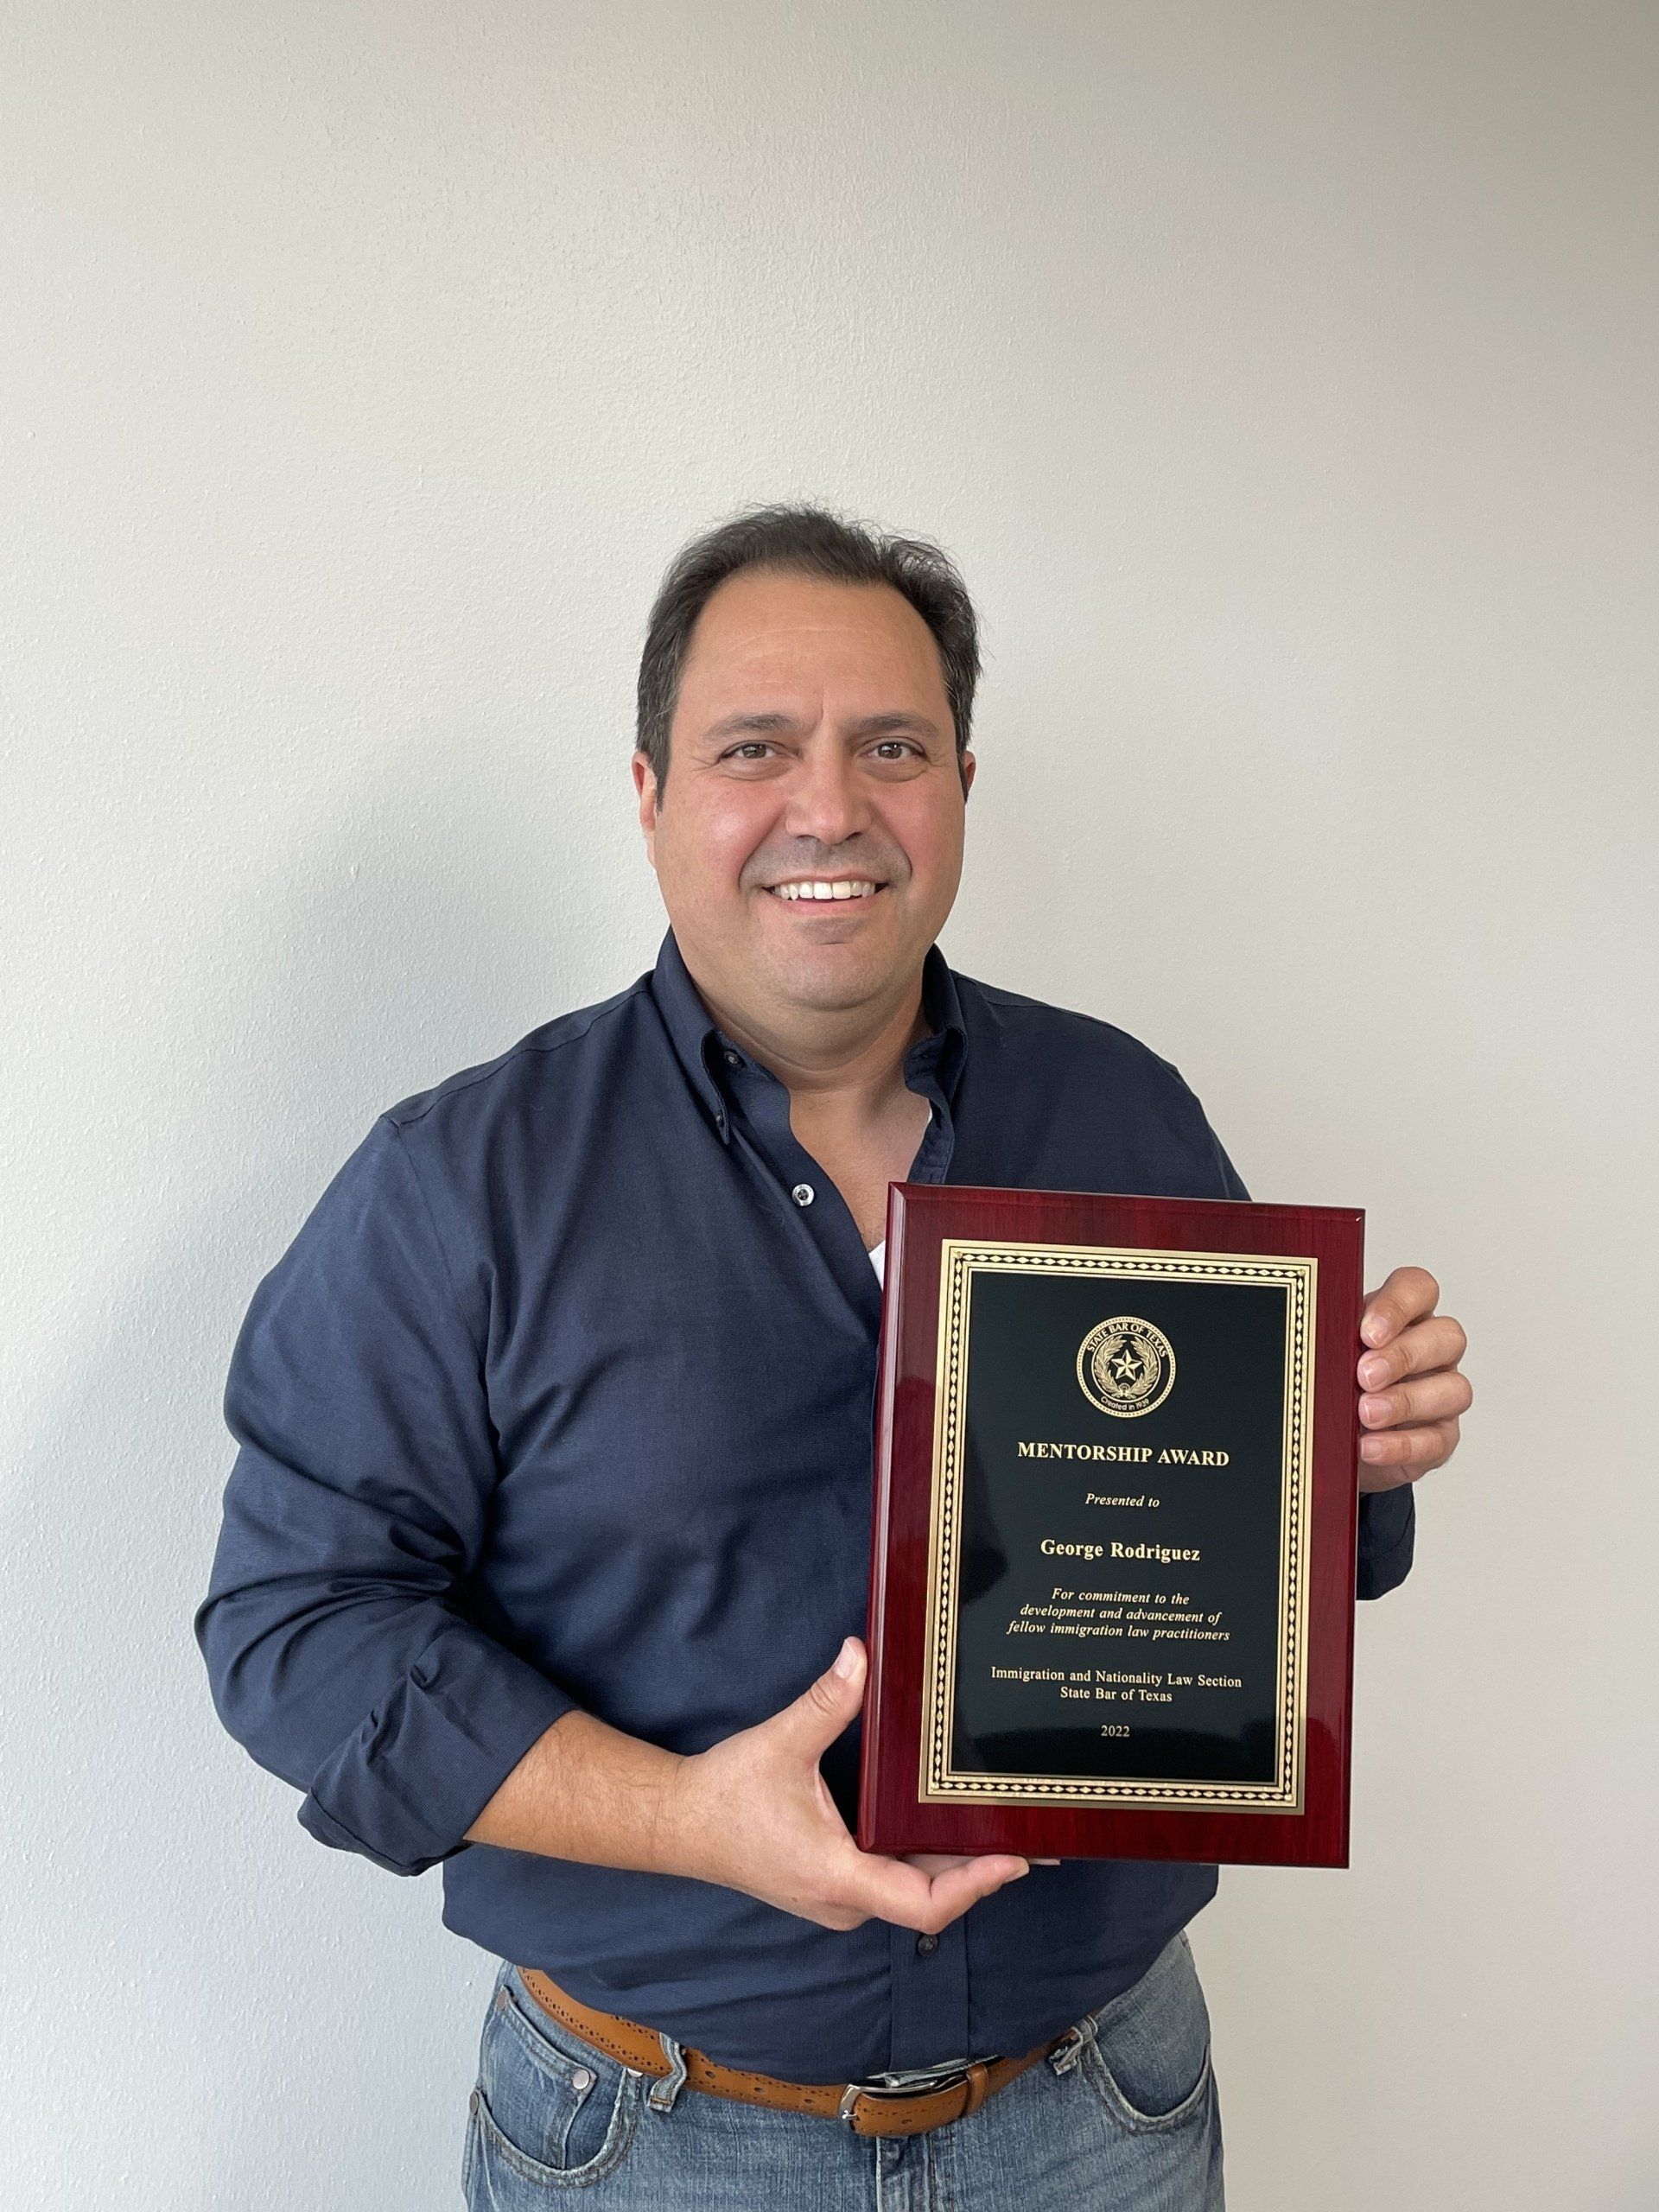 George holding the the Mentorship Award as the 2022 honoree from the State Bar of Texas' Immigration